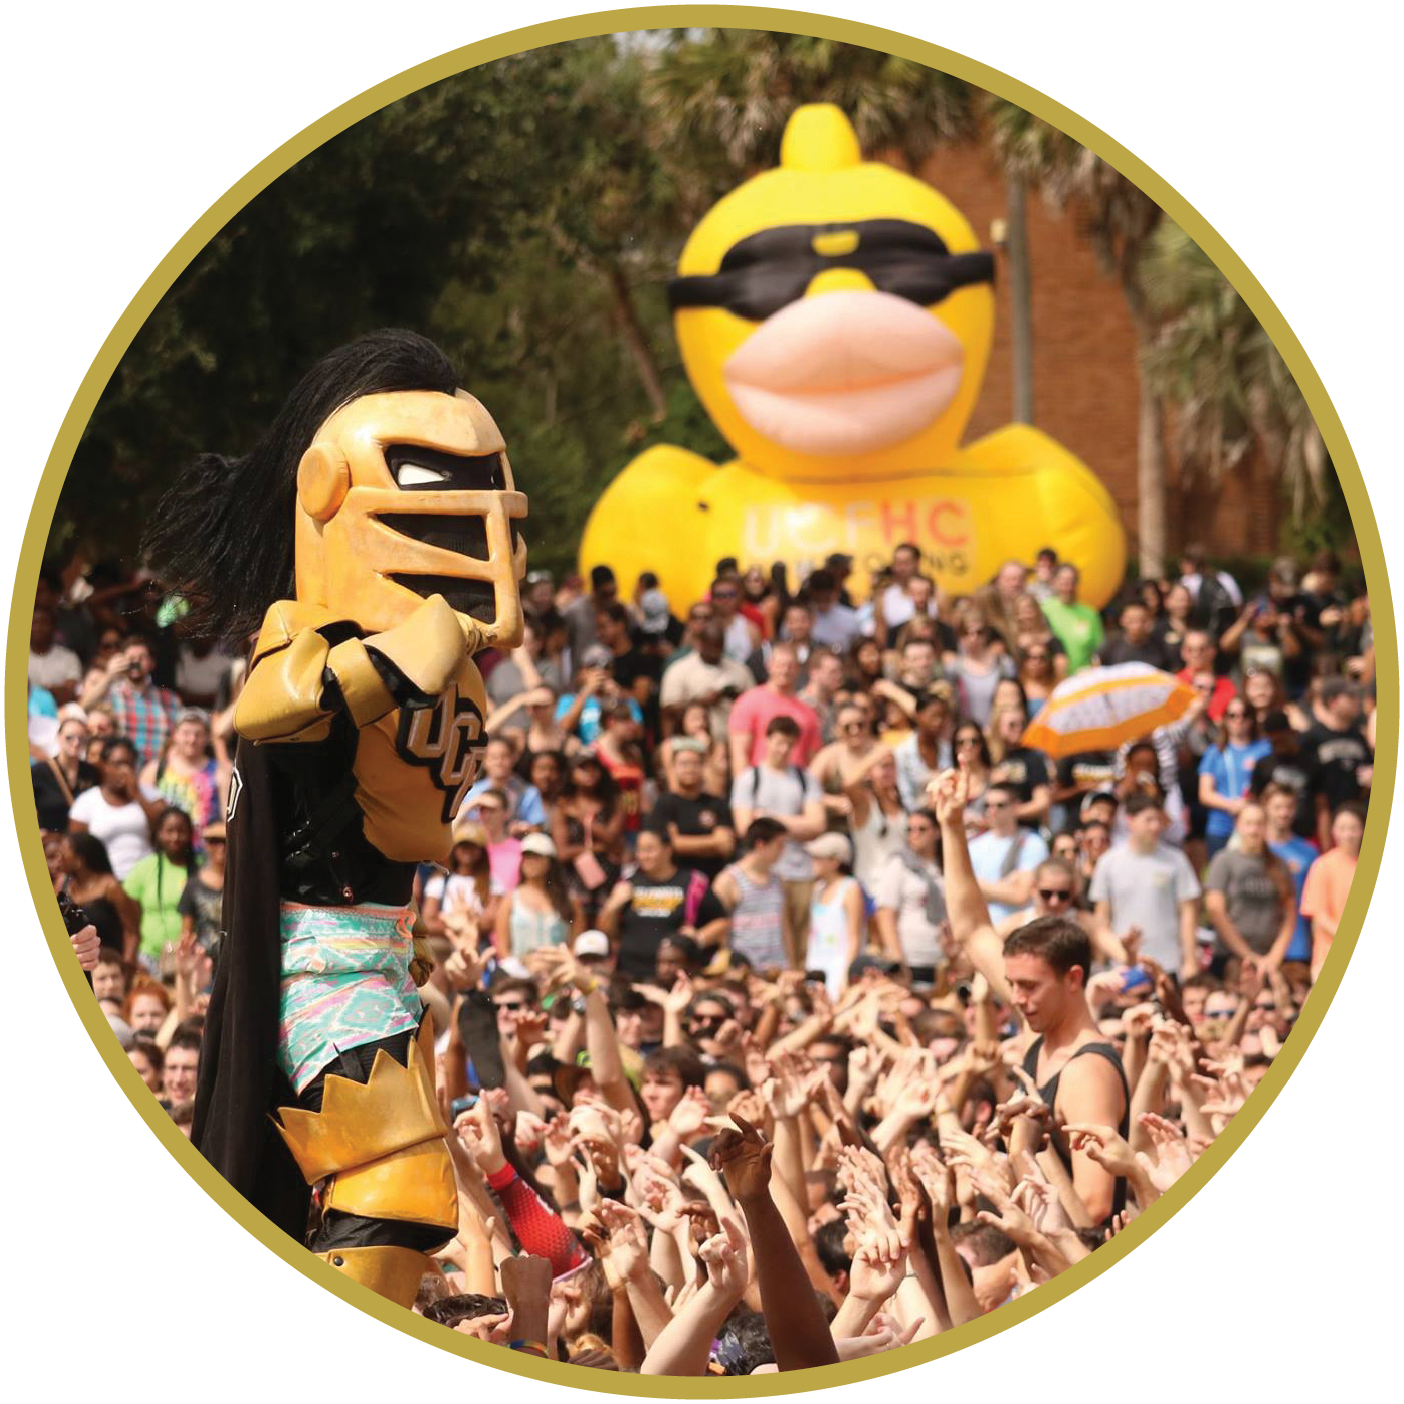 Knightro, the mascot at the University of Central Florida